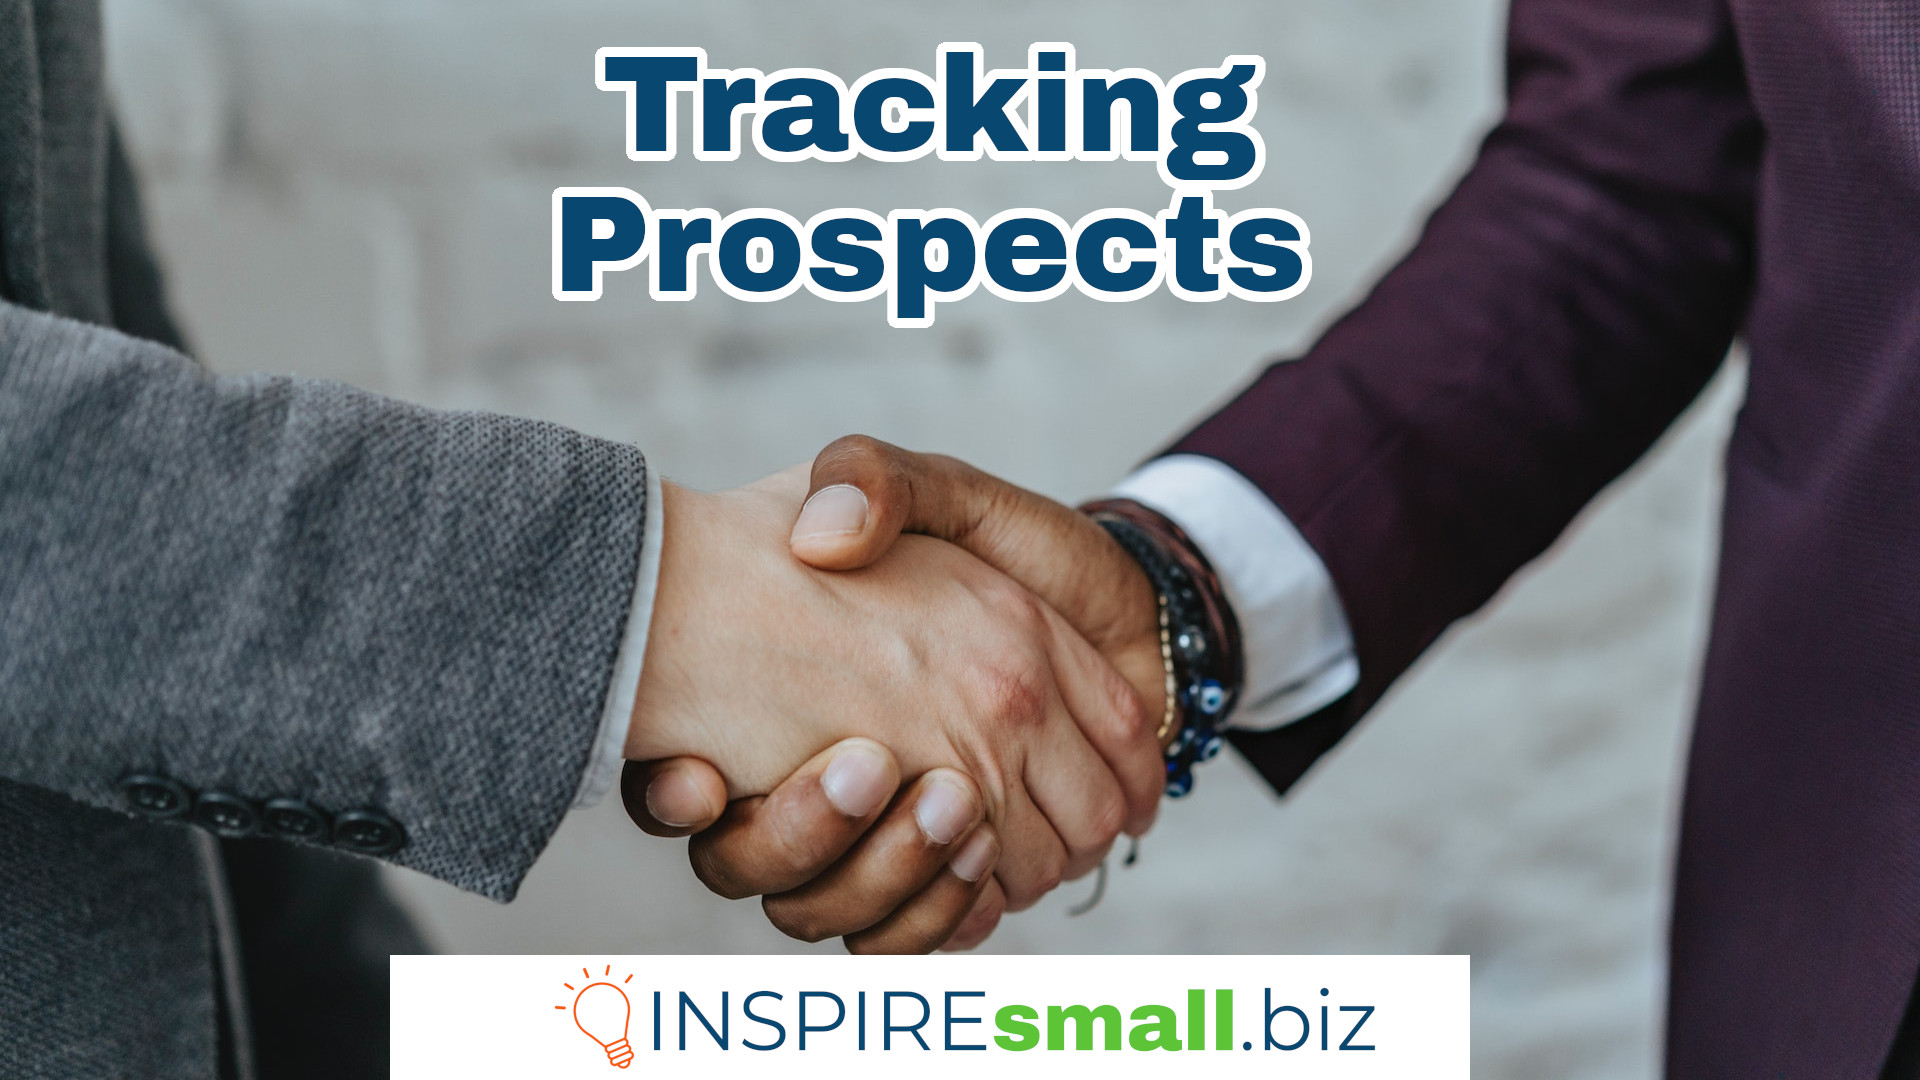 2 people shaking hands, with the text Tracking Prospects, blog by INSPIREsmall.biz